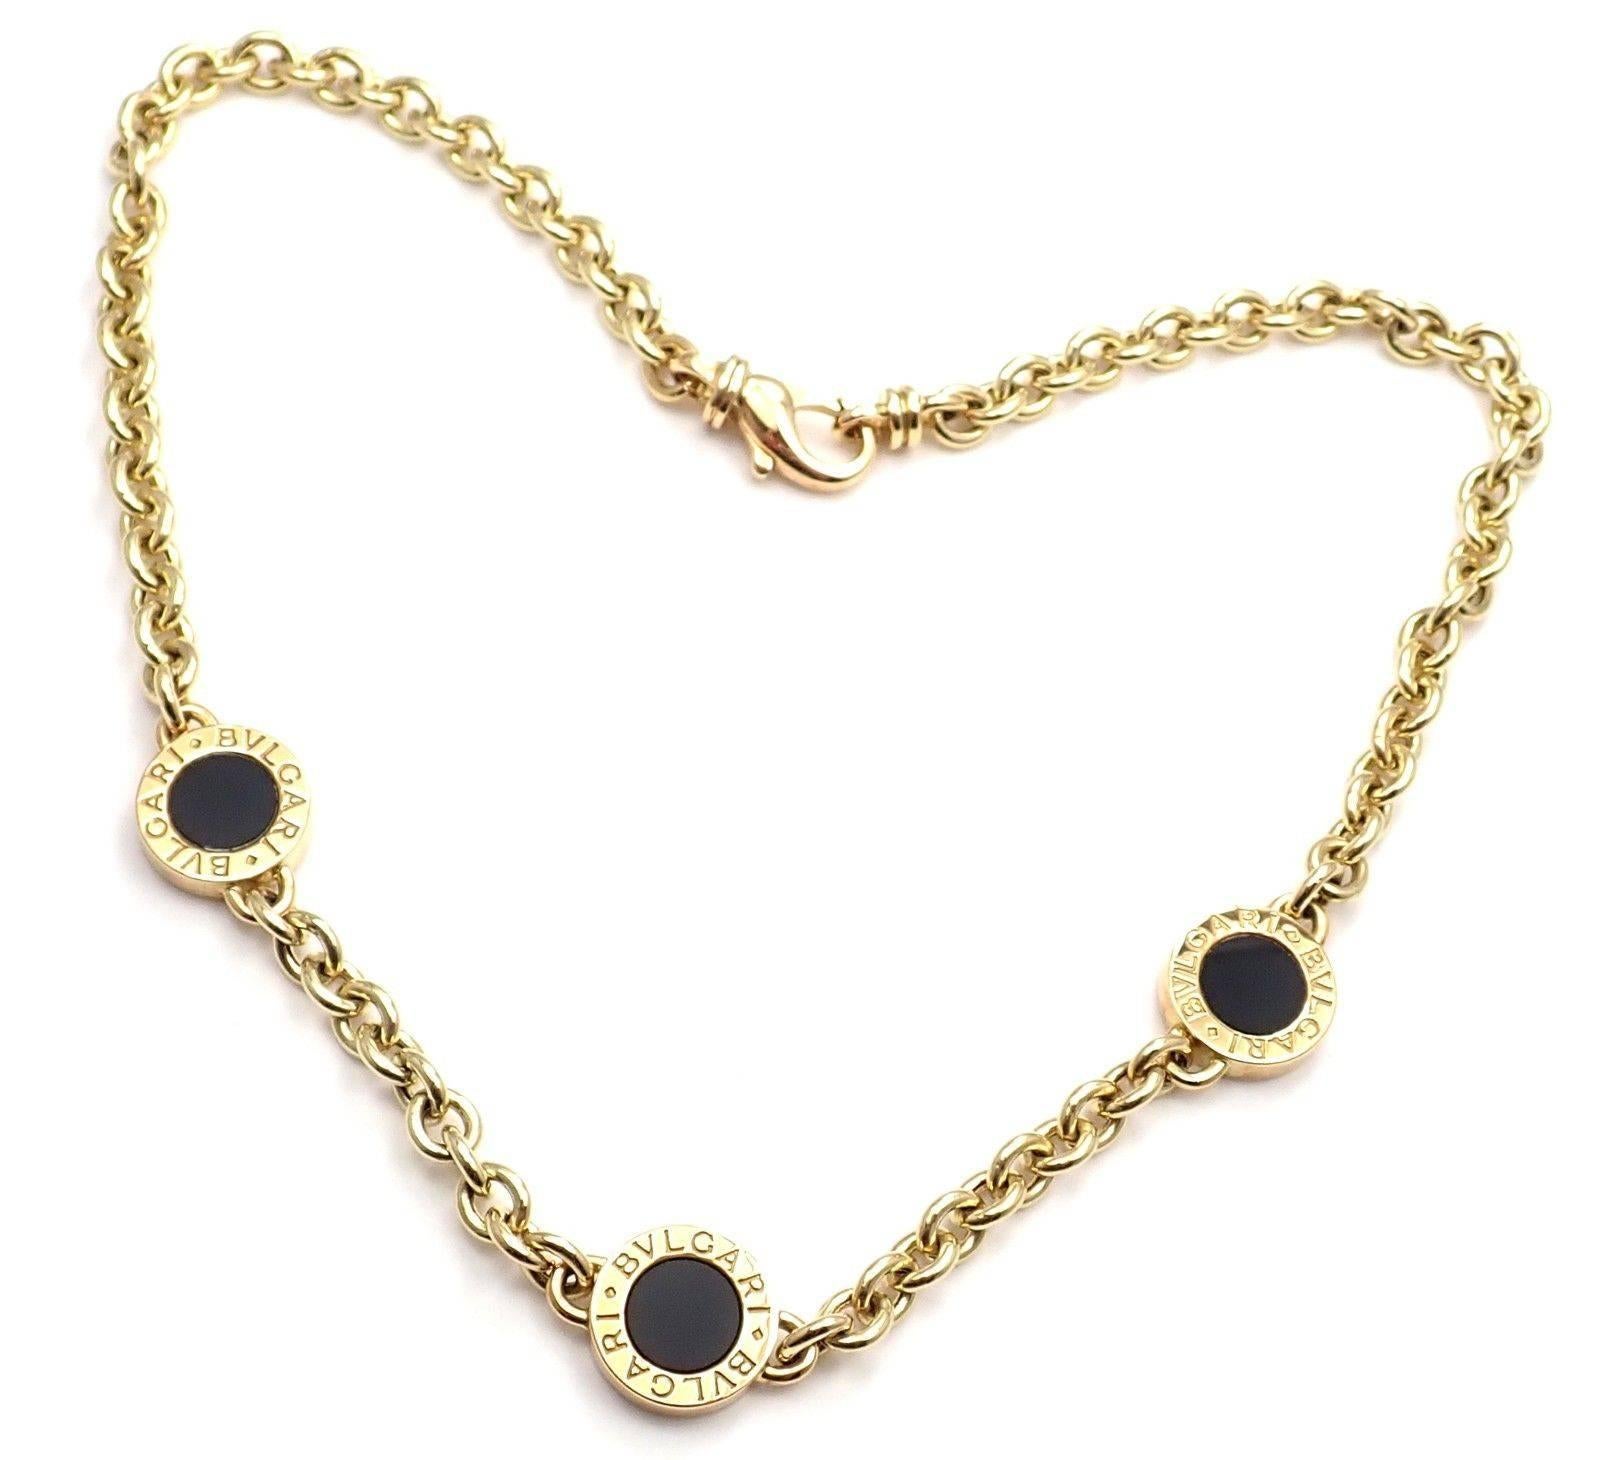 18k Yellow Gold Three Onyx Pendants Link Necklace by Bulgari.  
With 3 round black onyx stones 8mm each.
Details: 
Weight: 31.6 grams
Length: 15.5